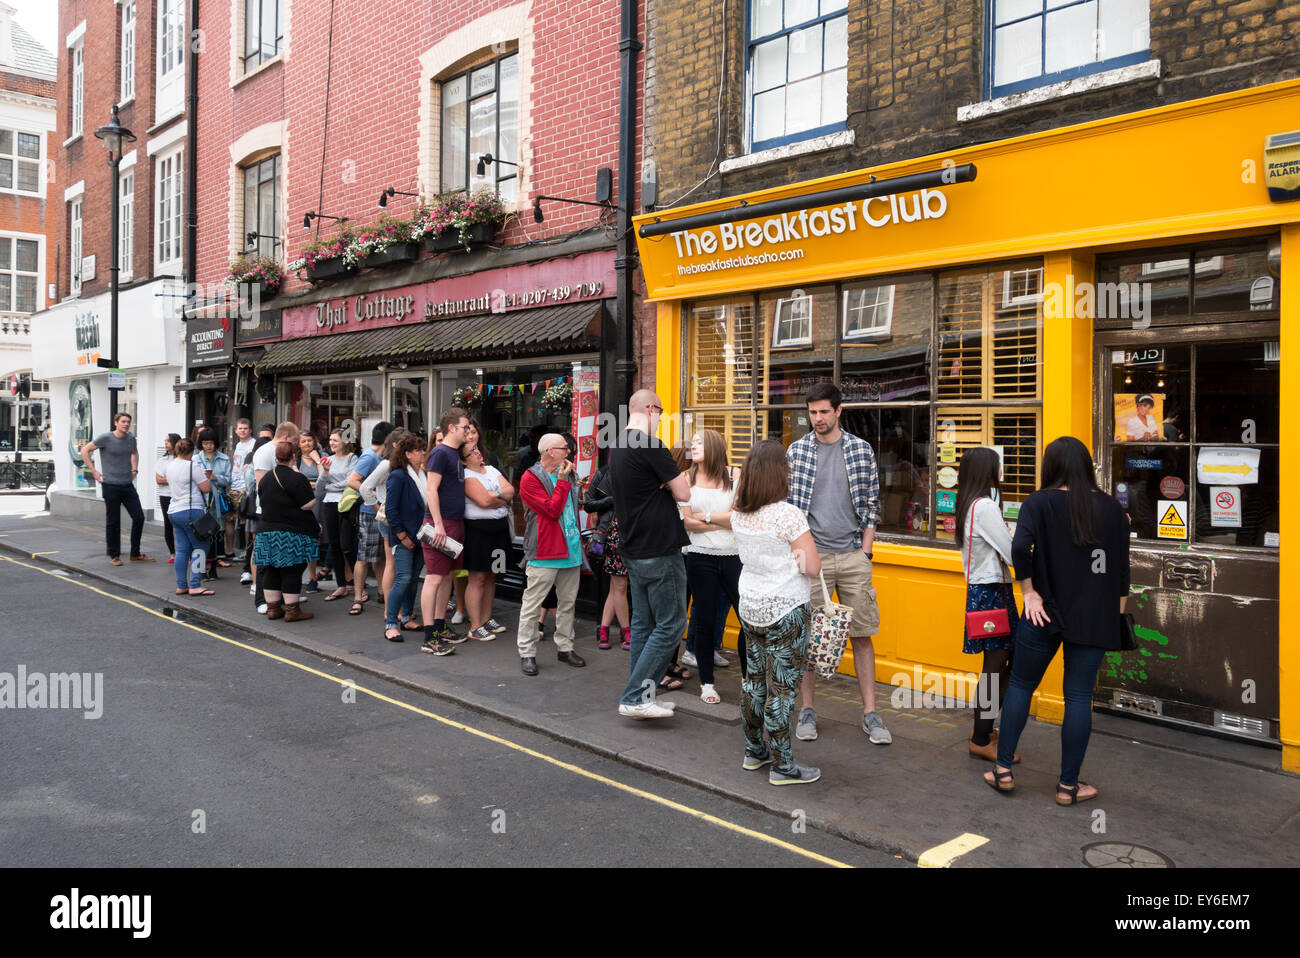 People queuing up outside the popular Breakfast Club cafe restaurant, D'arblay St, Soho, London UK Stock Photo